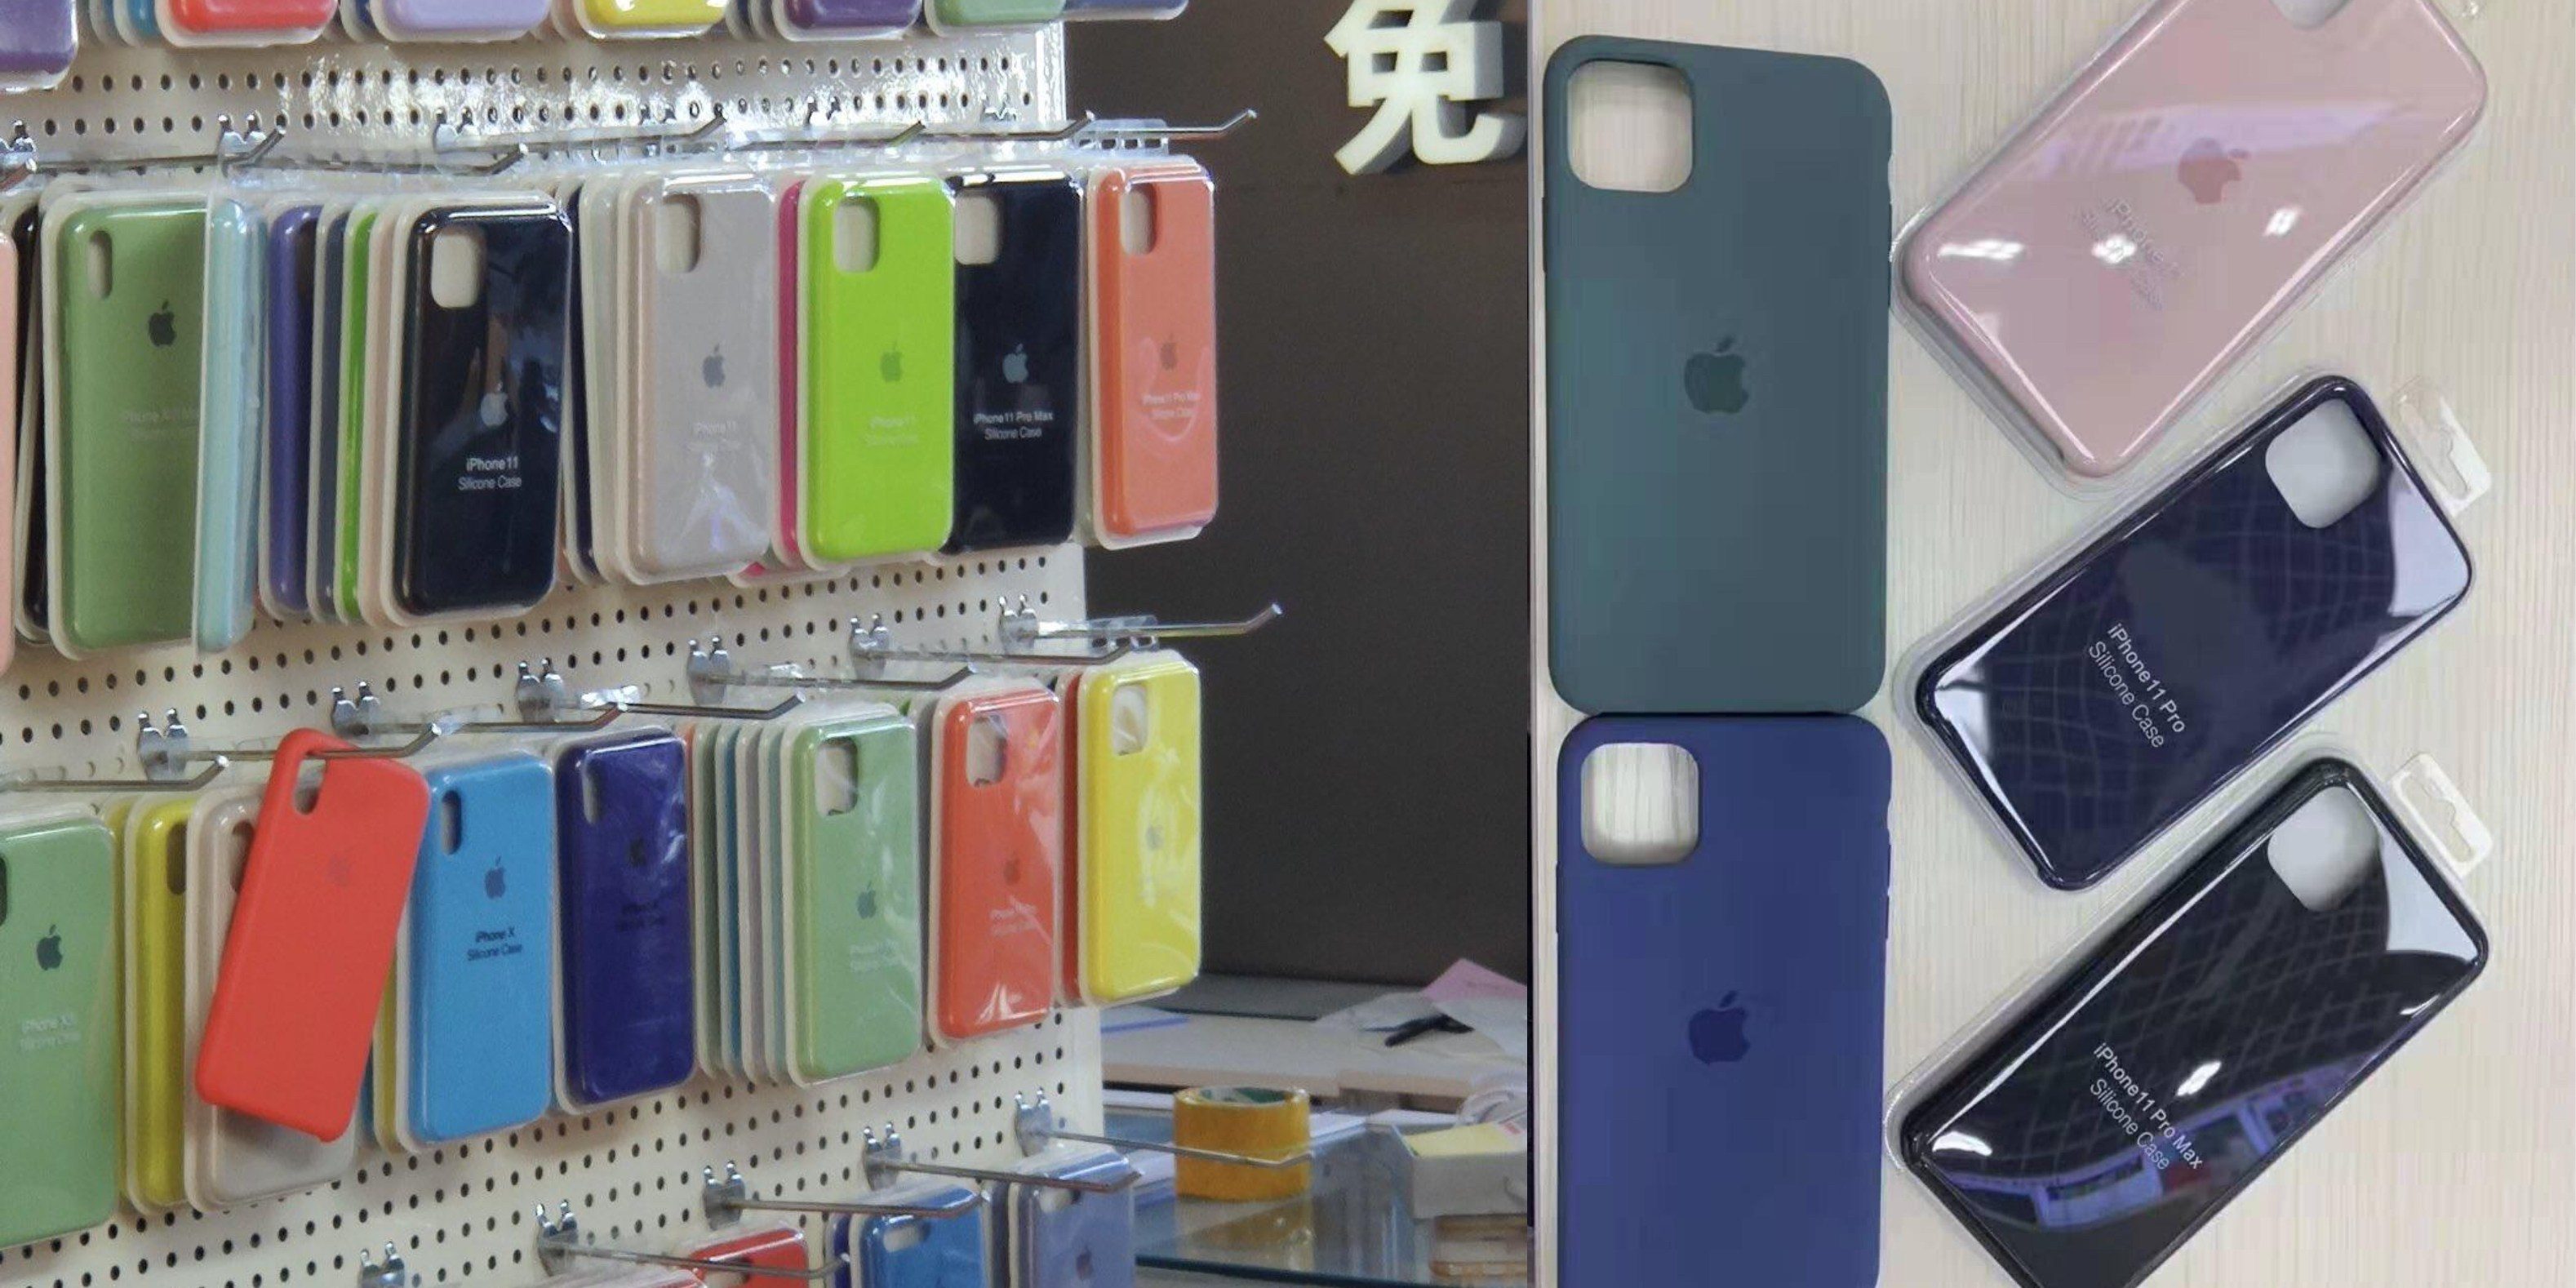 Leaked Photos of iPhone 11 Cases confirm design Change